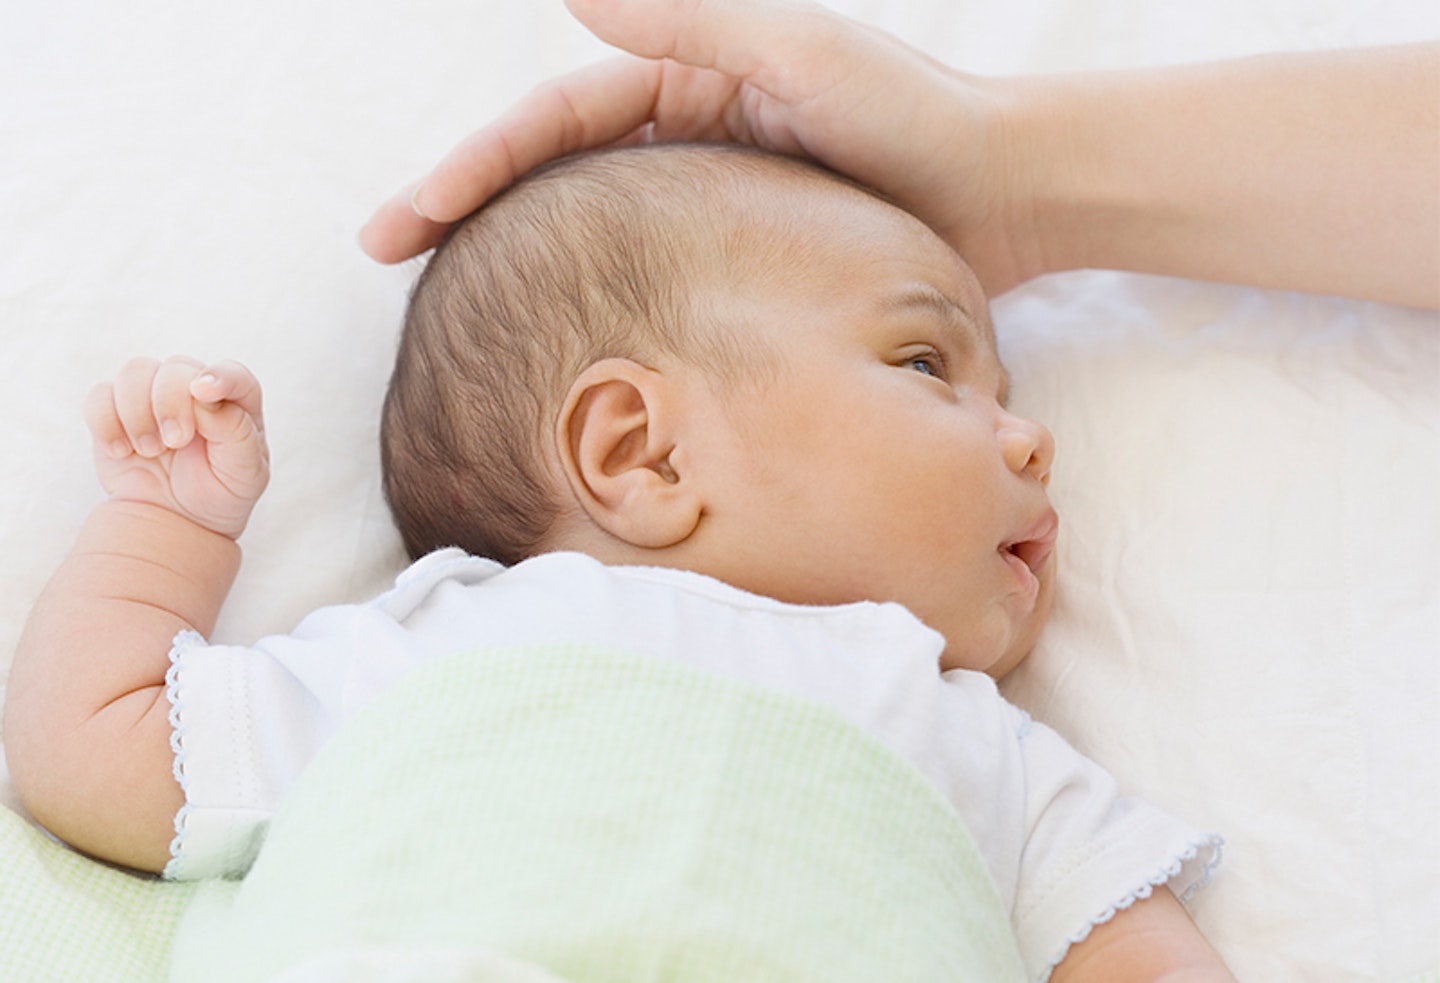 Study shows gently stroking babies ‘provides pain relief’